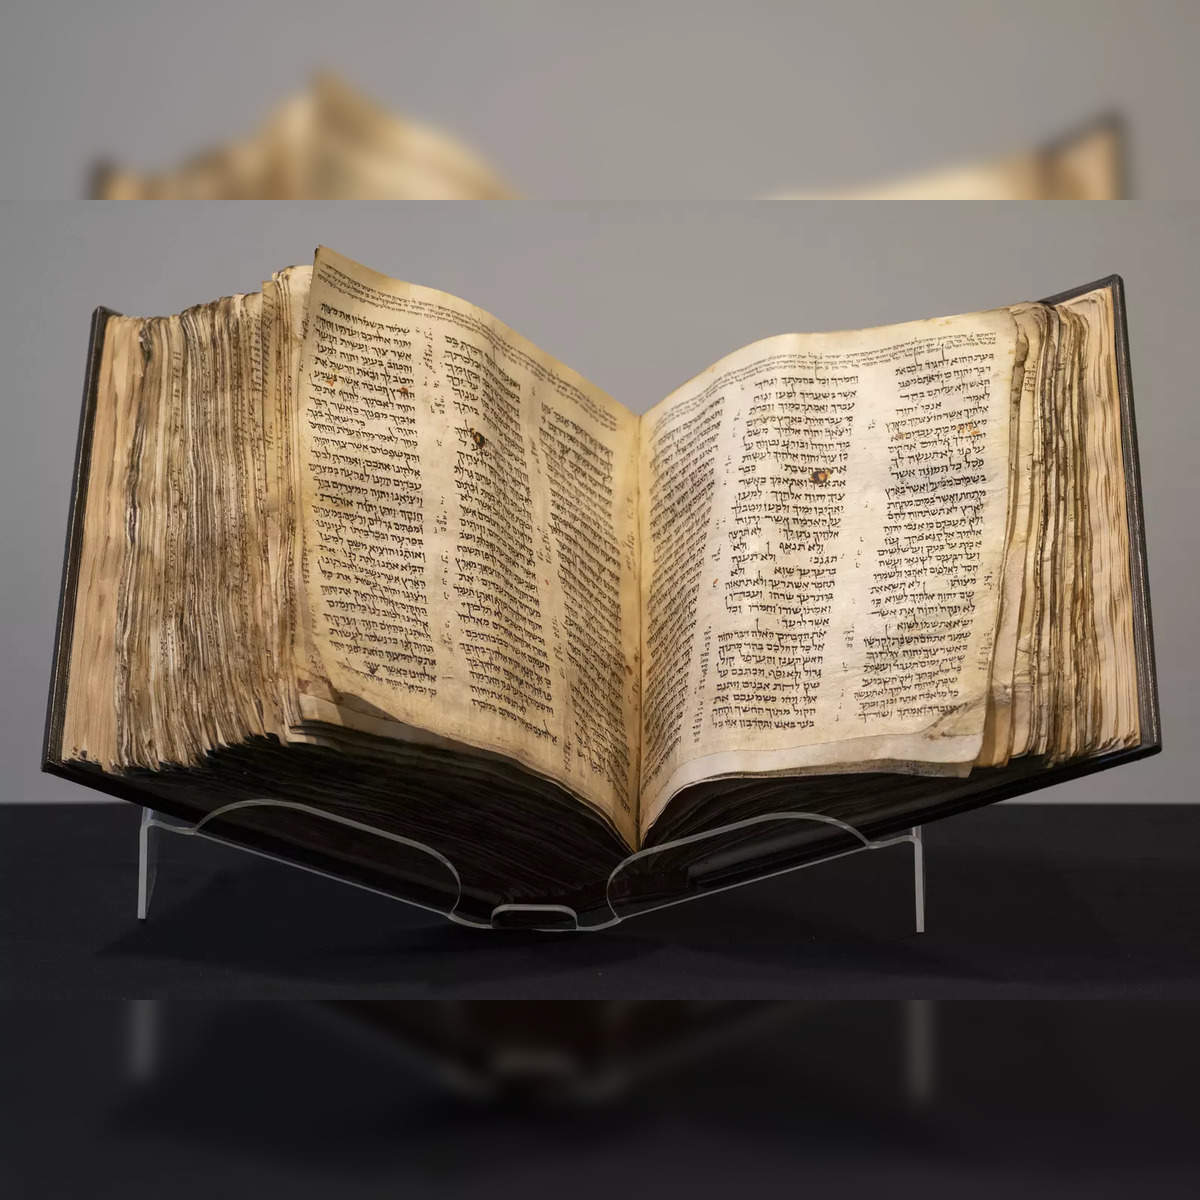 From Ancient Scrolls to Modern Bibles